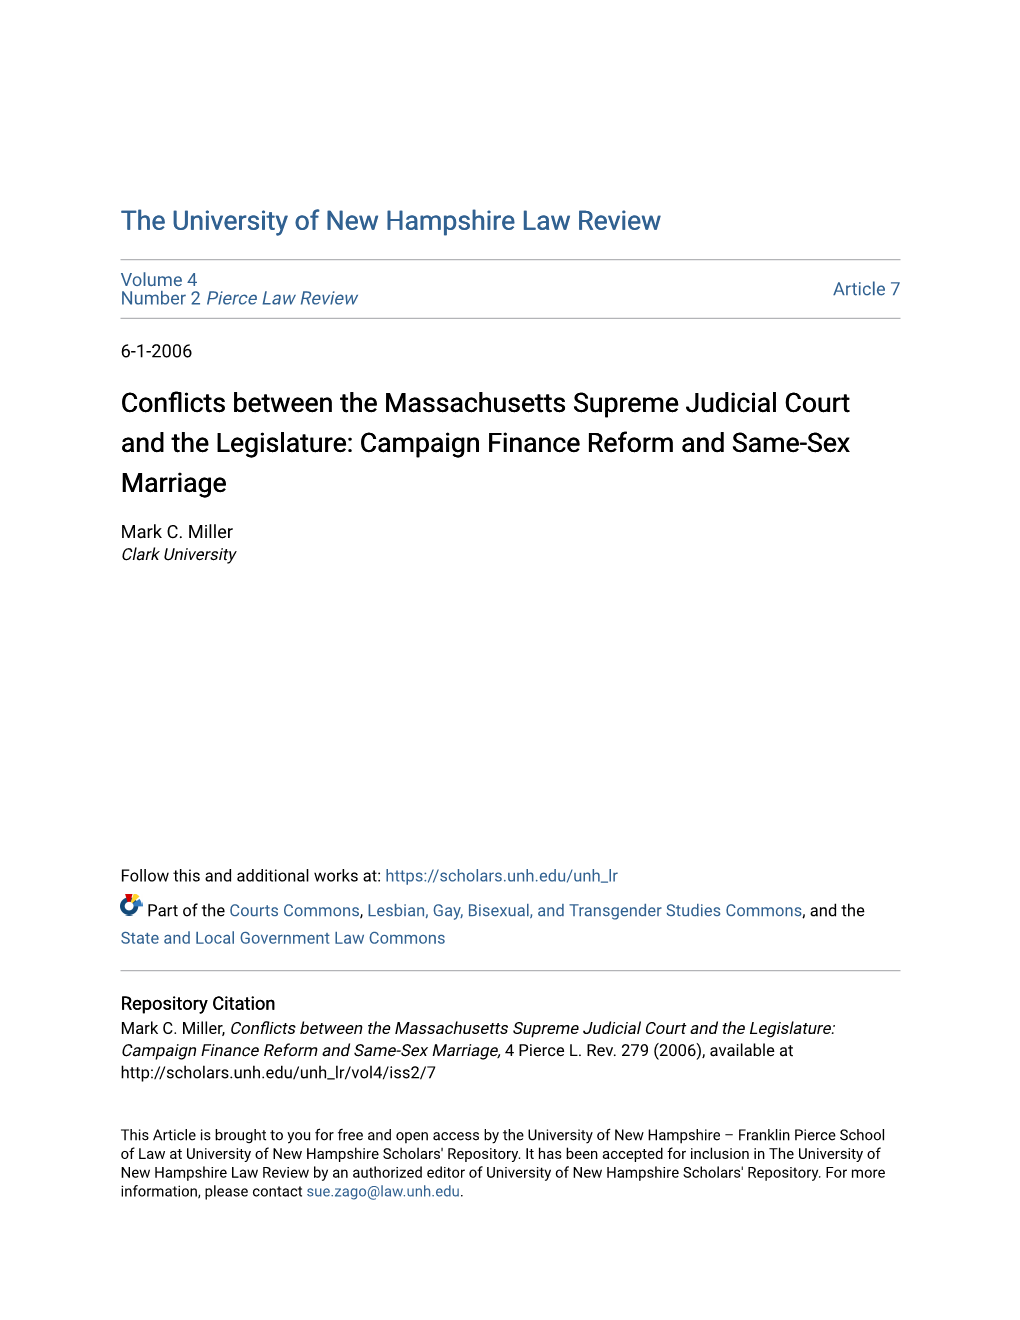 Conflicts Between the Massachusetts Supreme Judicial Court and the Legislature: Campaign Finance Reform and Same-Sex Marriage